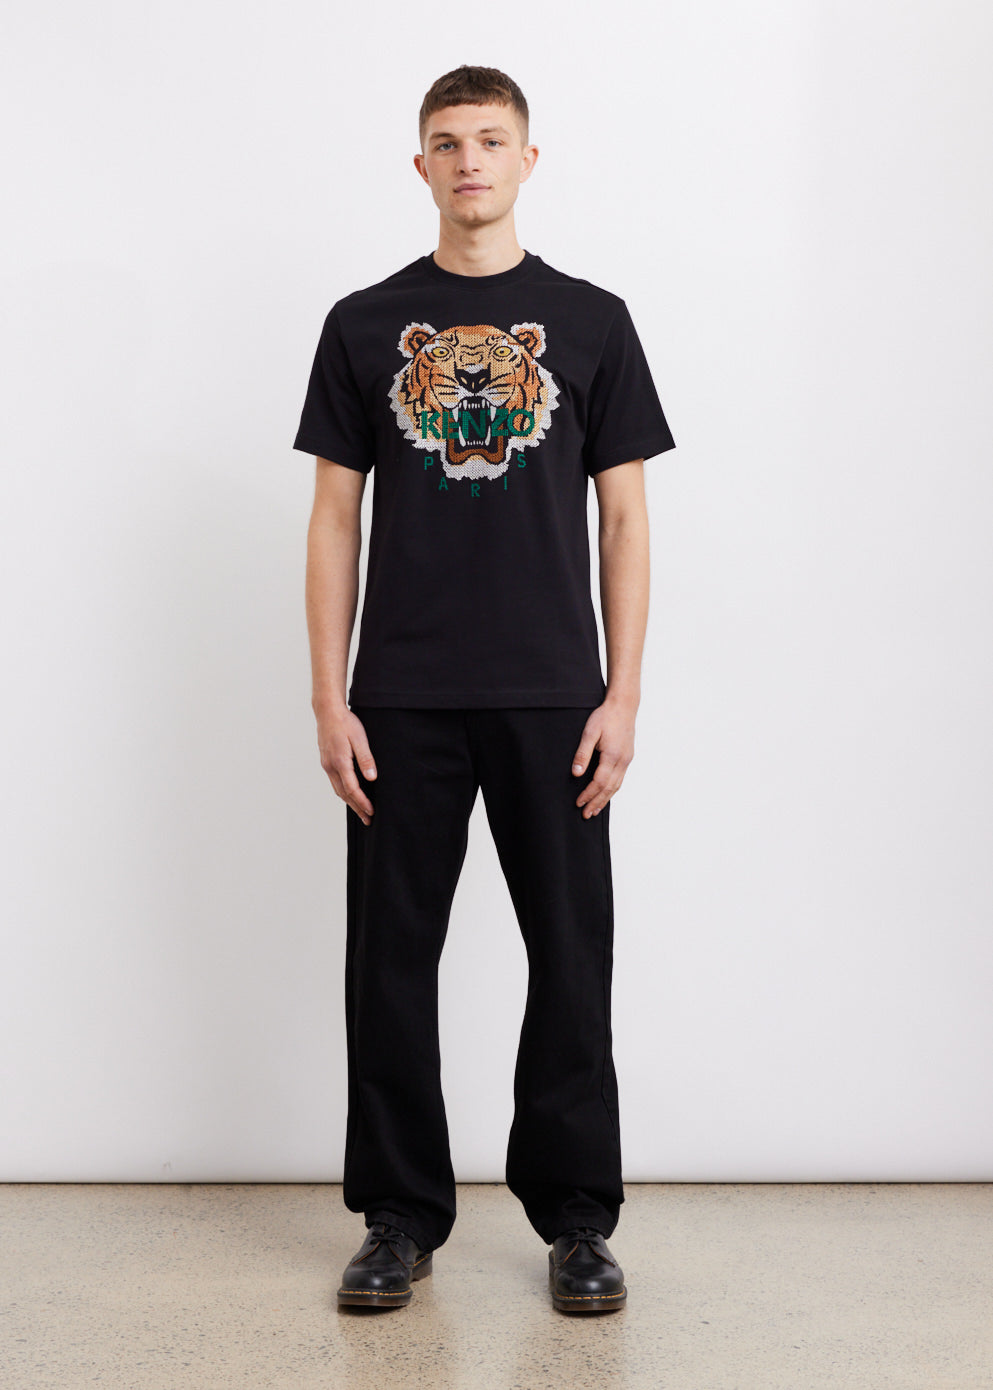 $240 KENZO Seasonal 2 Relaxed Embroidered Tiger T-Shirt Navy Blue Mens Small